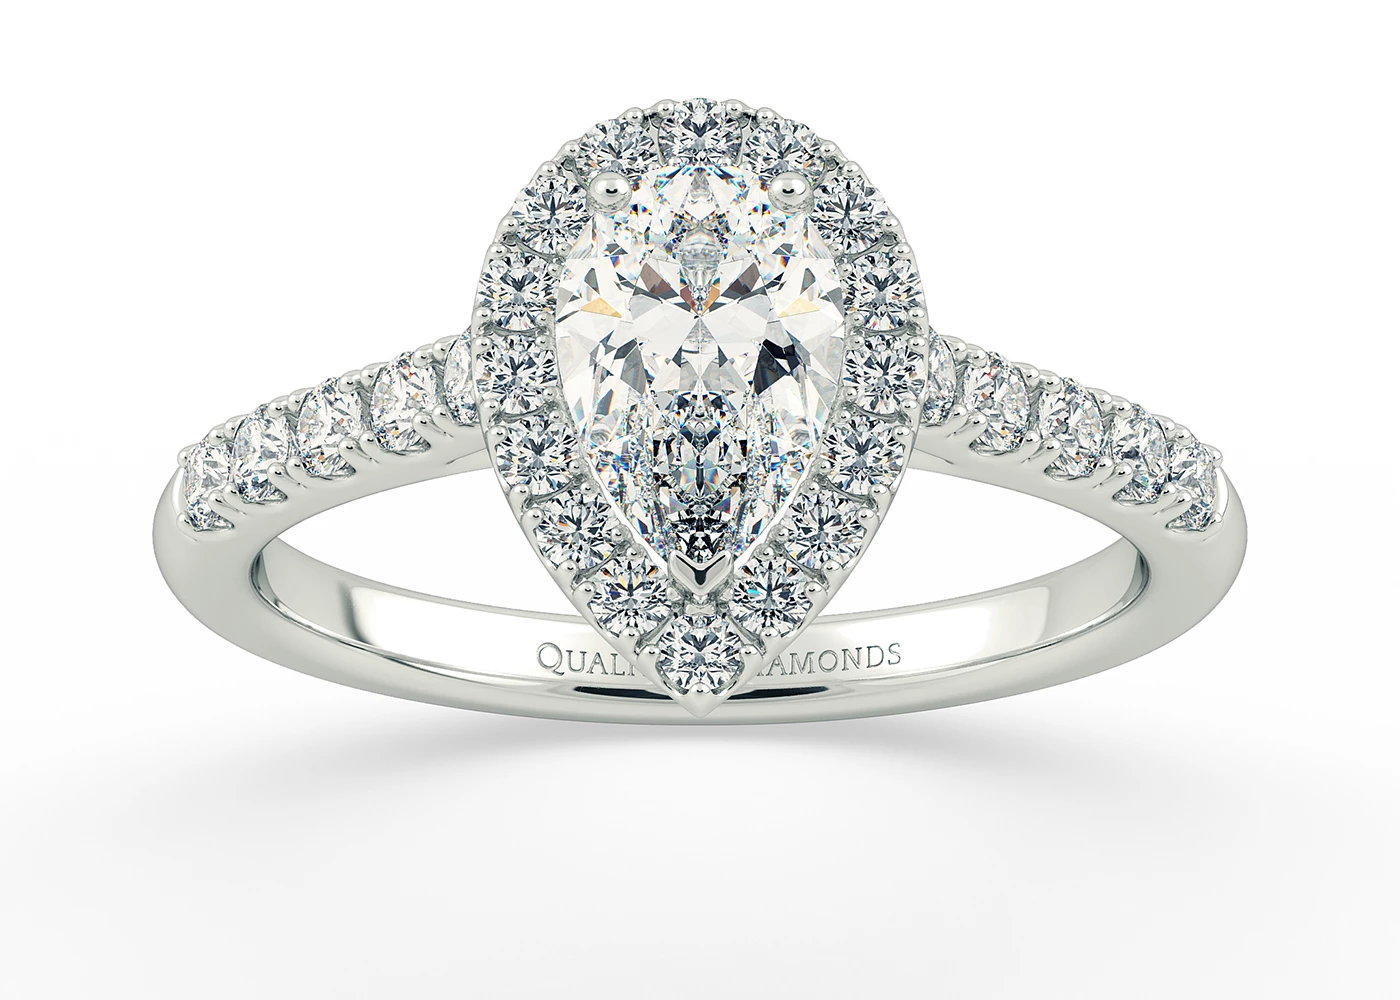 One Carat Pear Halo Diamond Ring in 18K White Gold